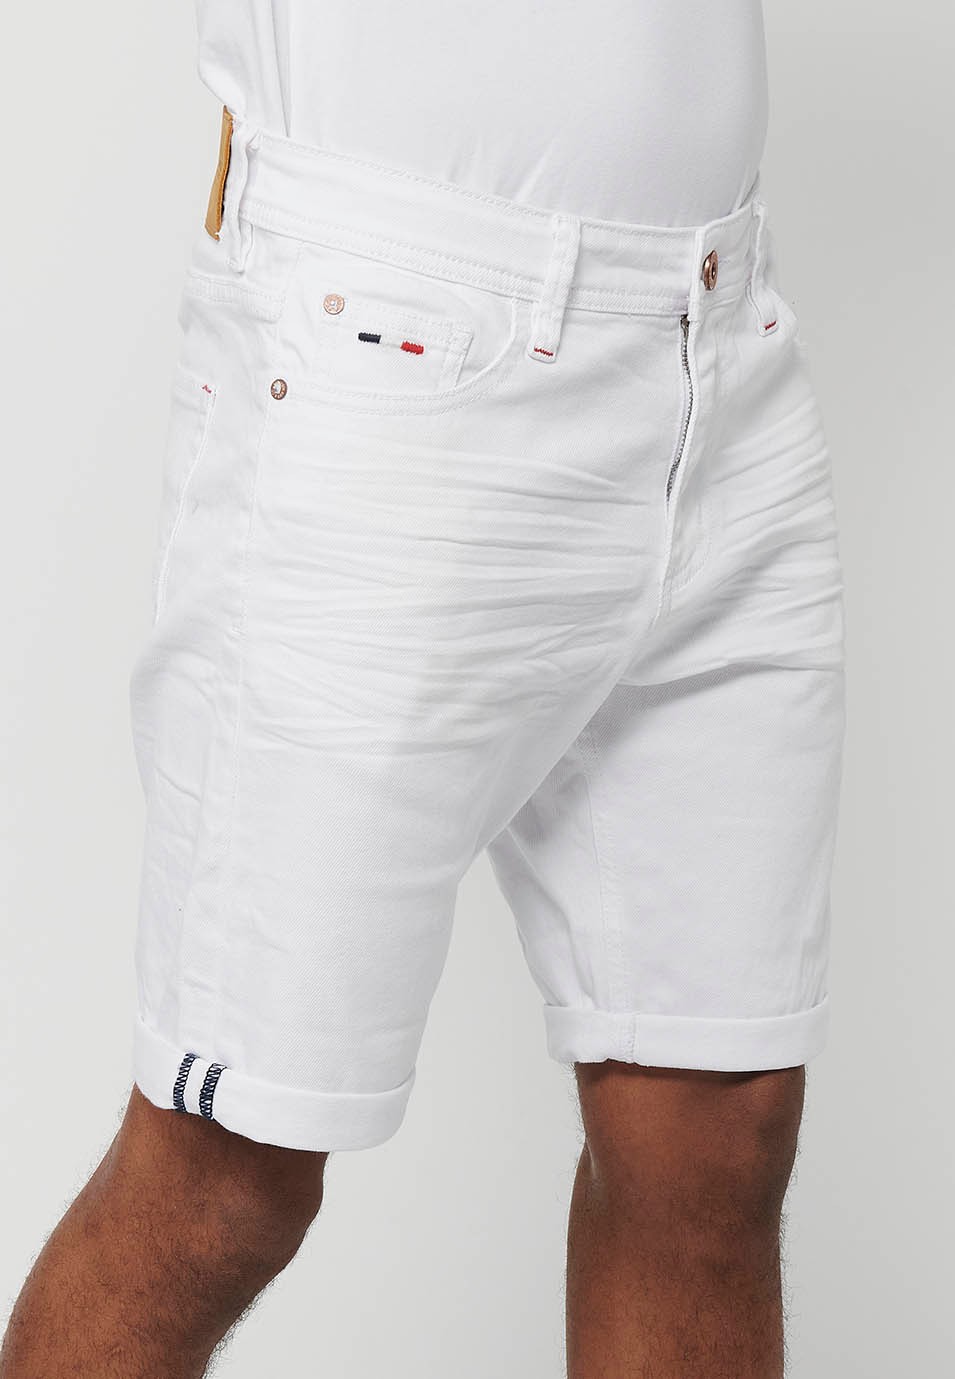 Denim Bermuda shorts with turn-up finish and front closure with zipper and button in White for Men 3